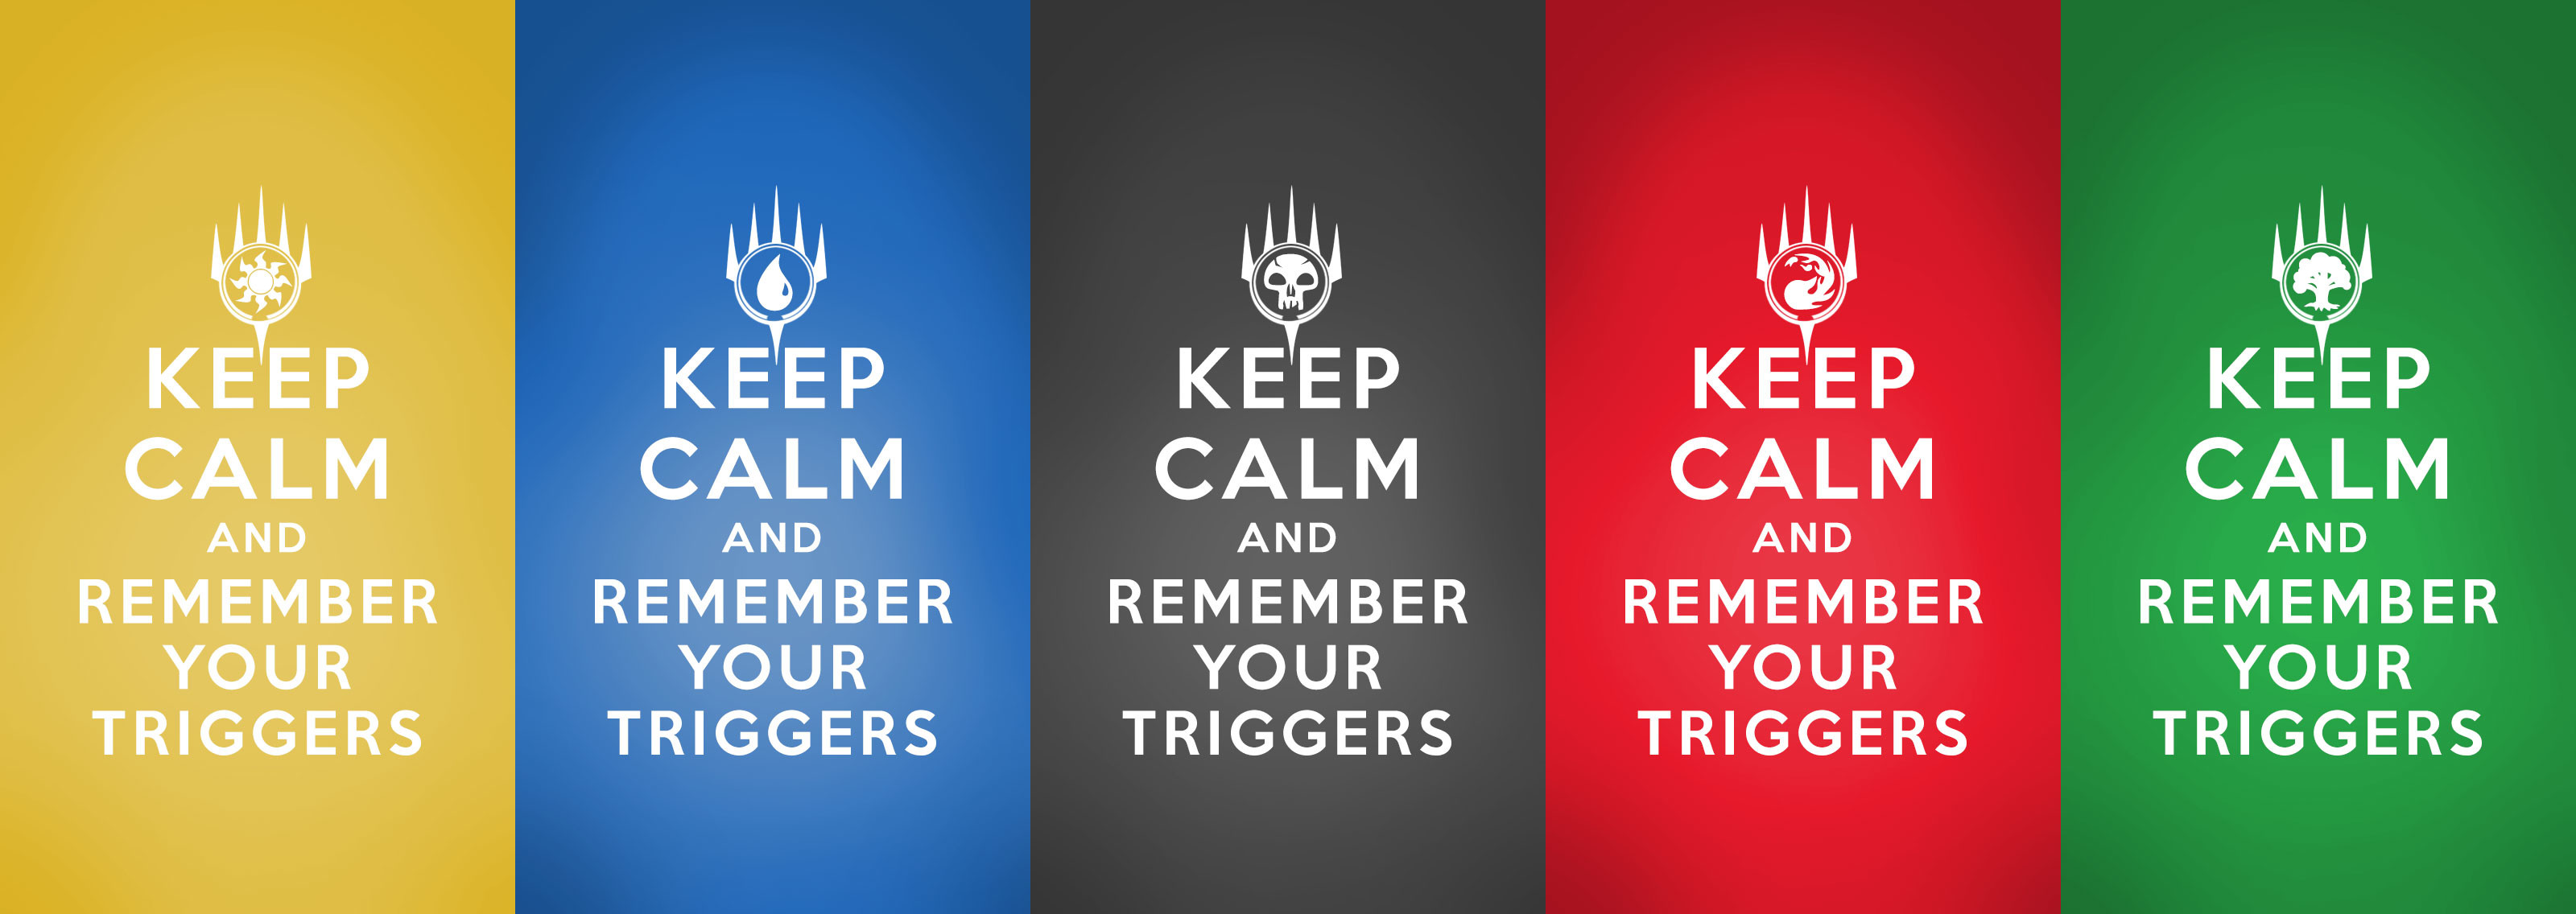 3200x1136 ... Keep Calm Remember Your Triggers iOS 7 Wallpapers by jessemunoz